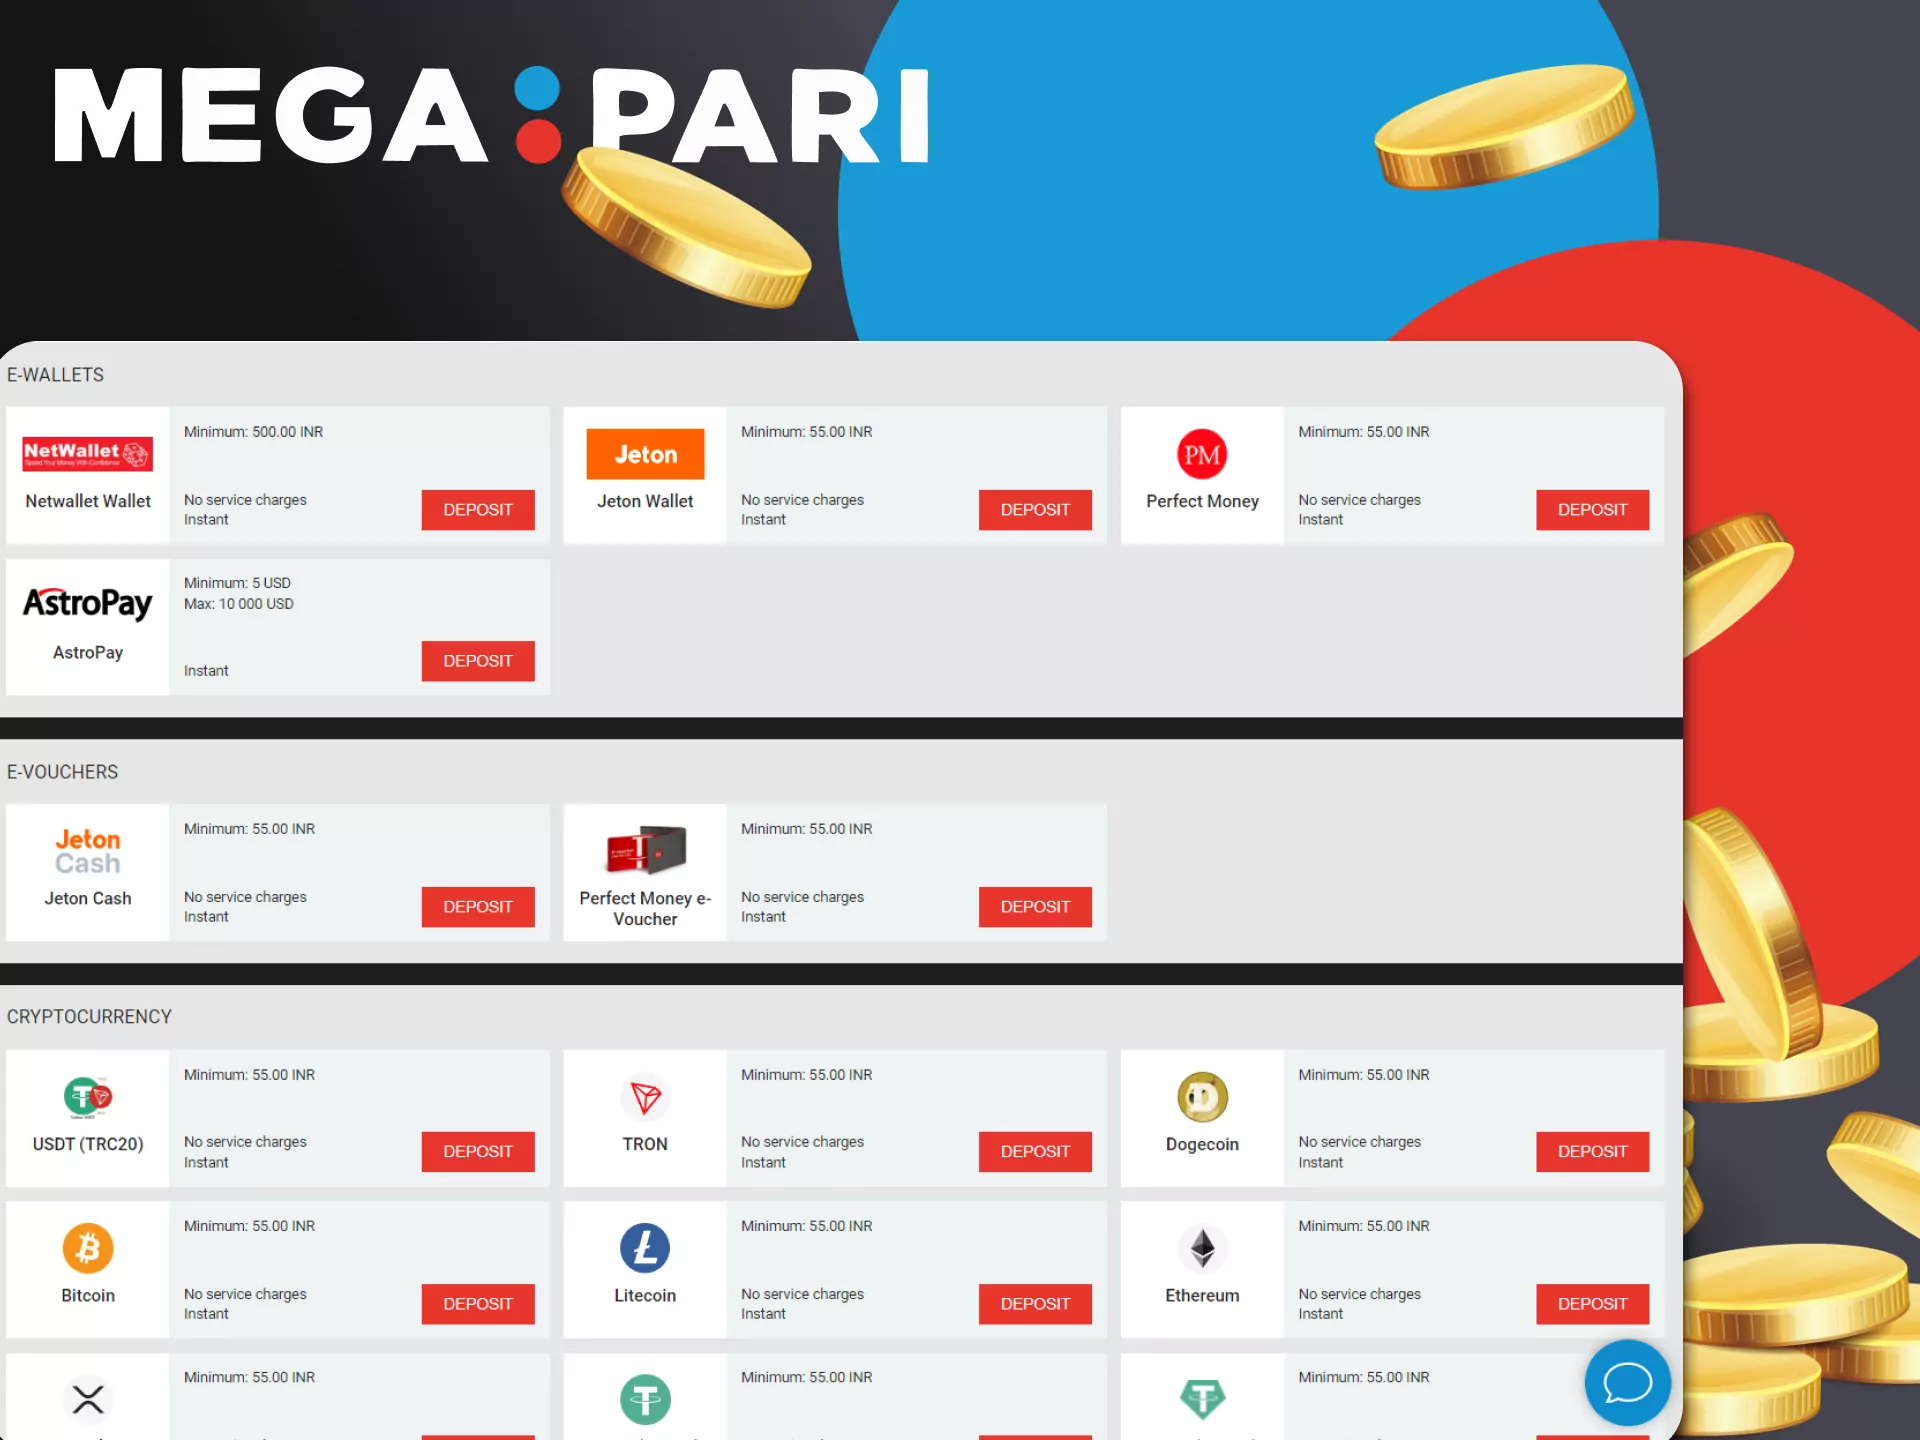 To make a deposit to Megapari, use the most popular payment methods in India.